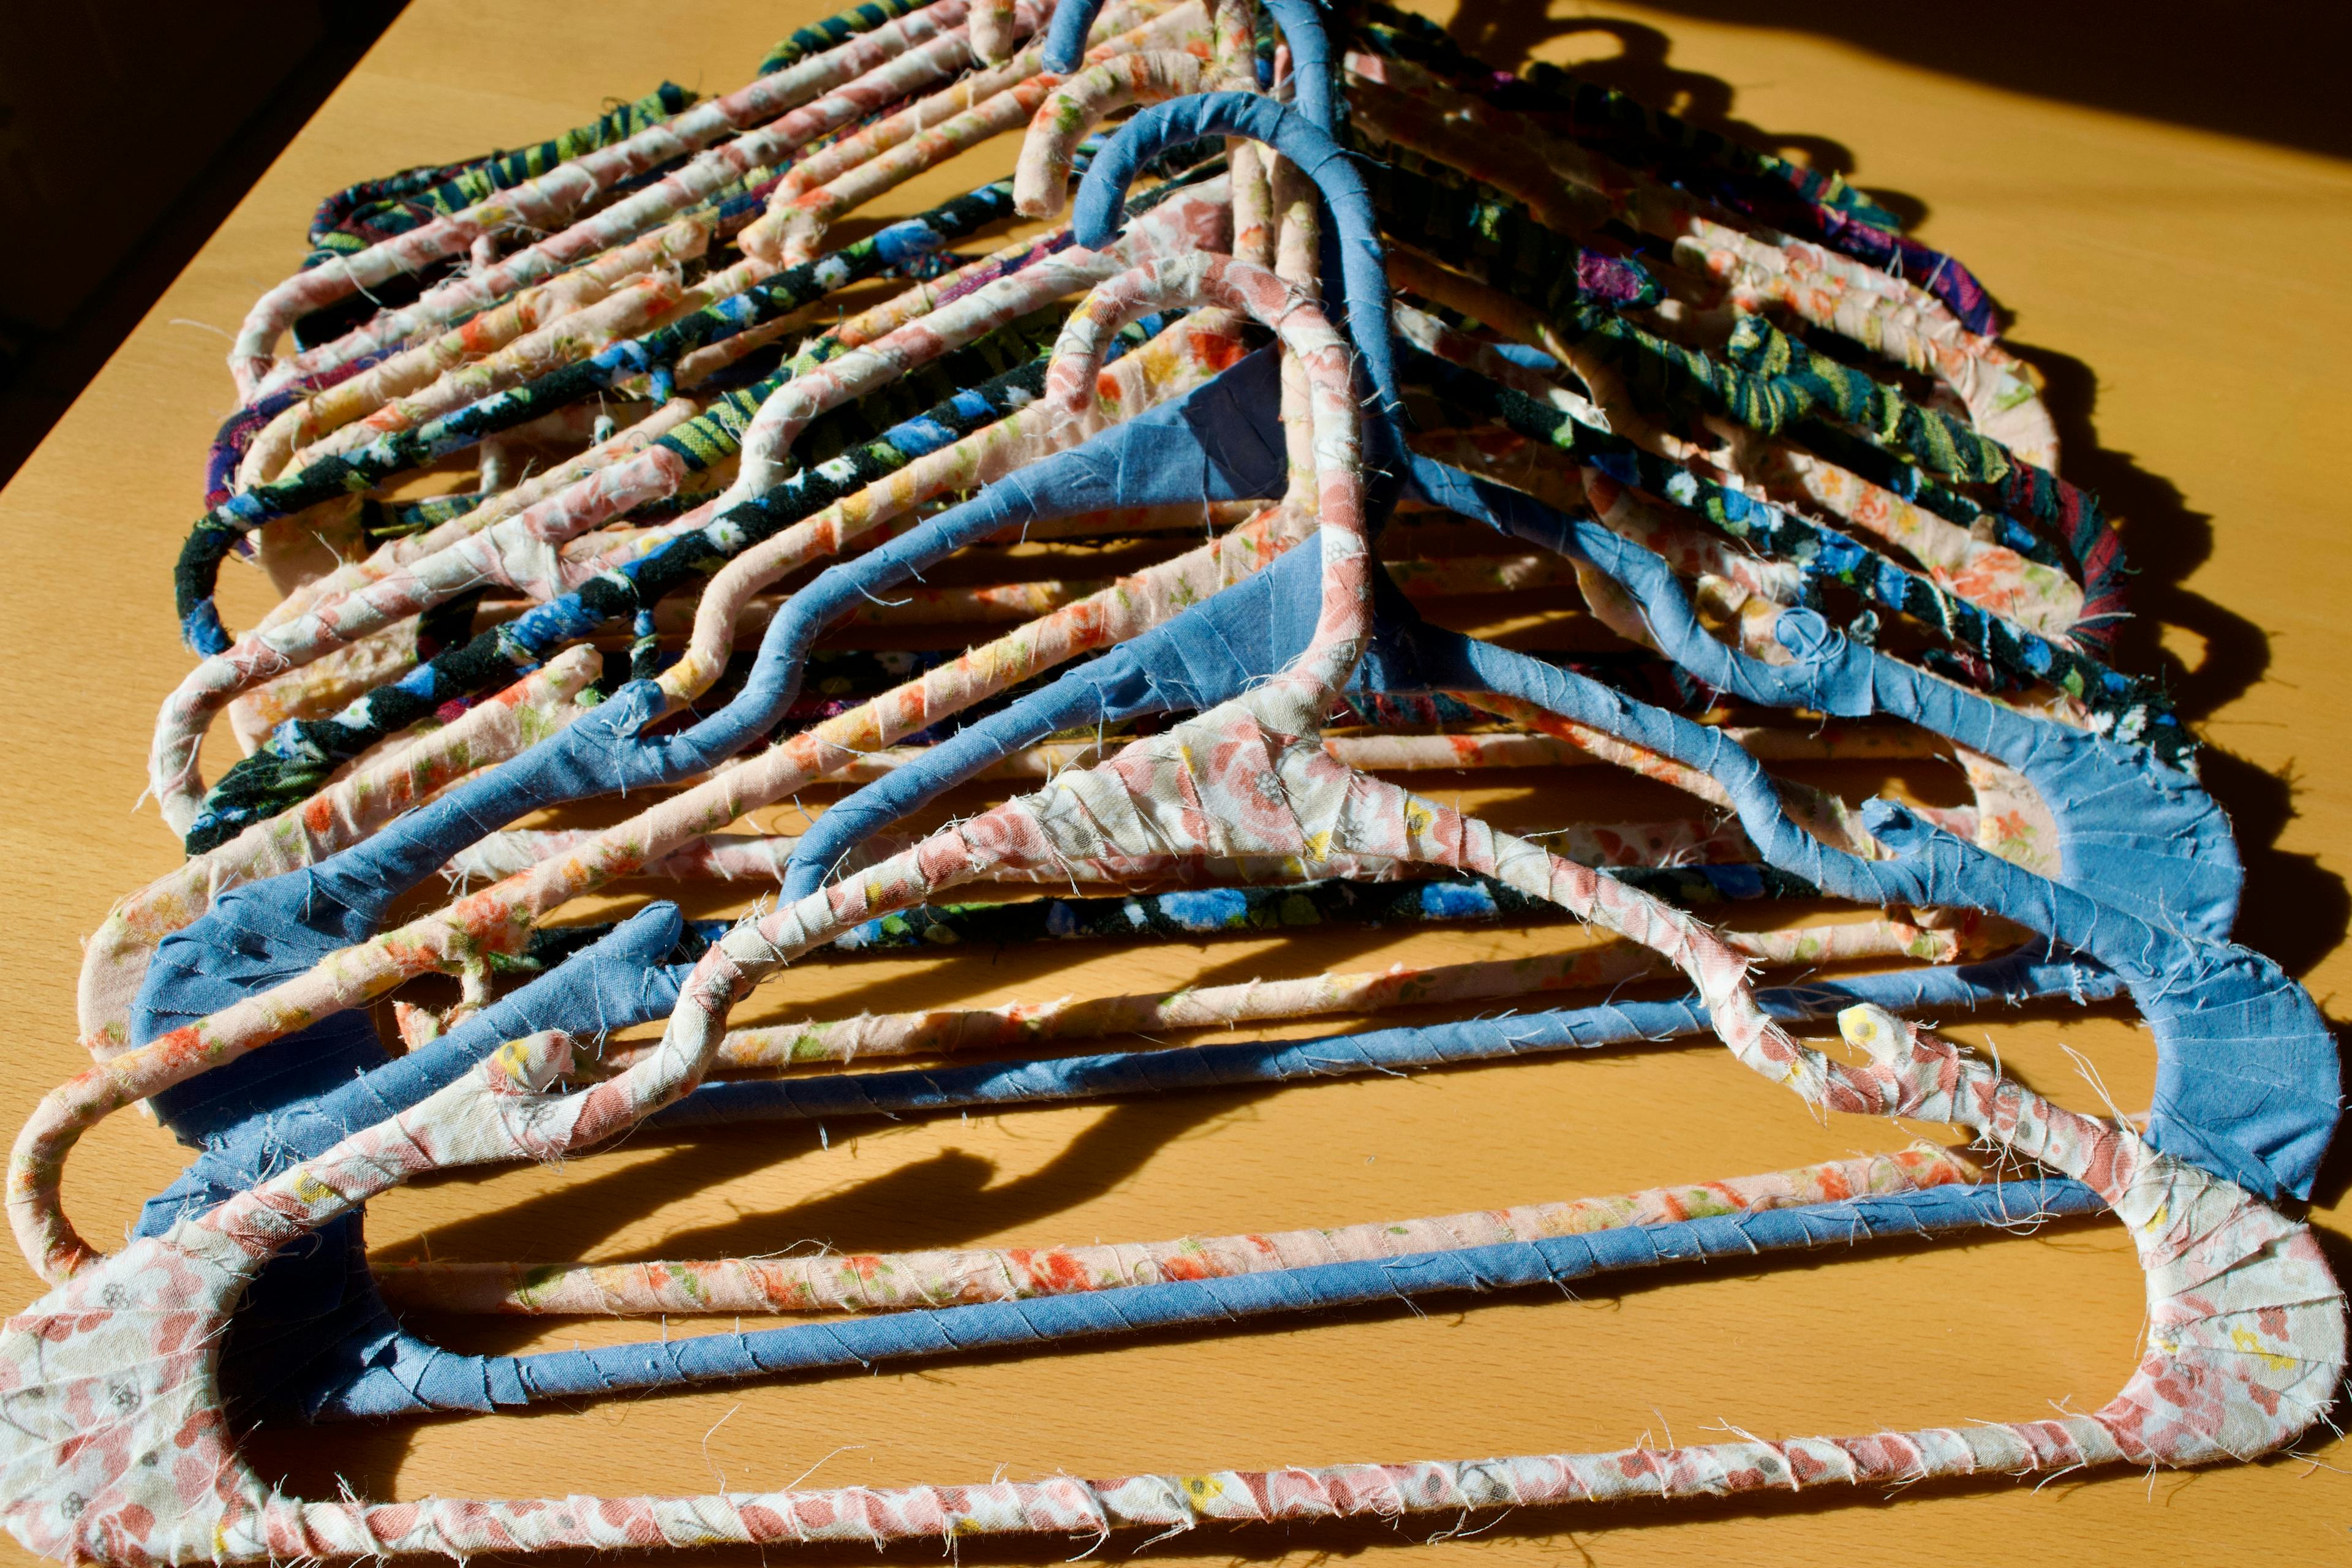 A stack of fabric wrapped hangers on a wooden table in bright sunlight